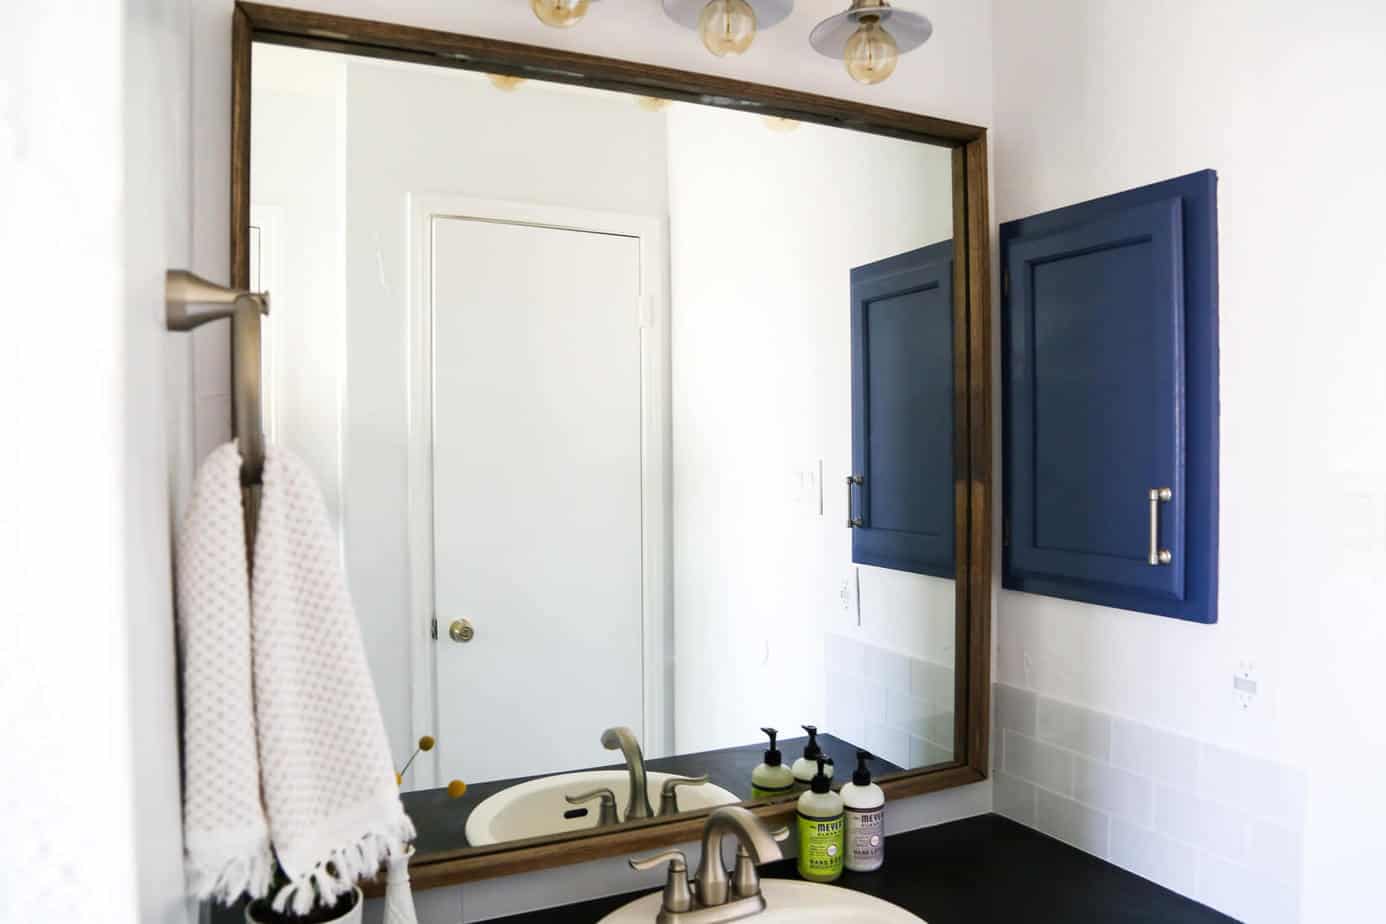 How to quickly and easily frame a bathroom mirror, to take your bathroom from builder-grade to completely custom!